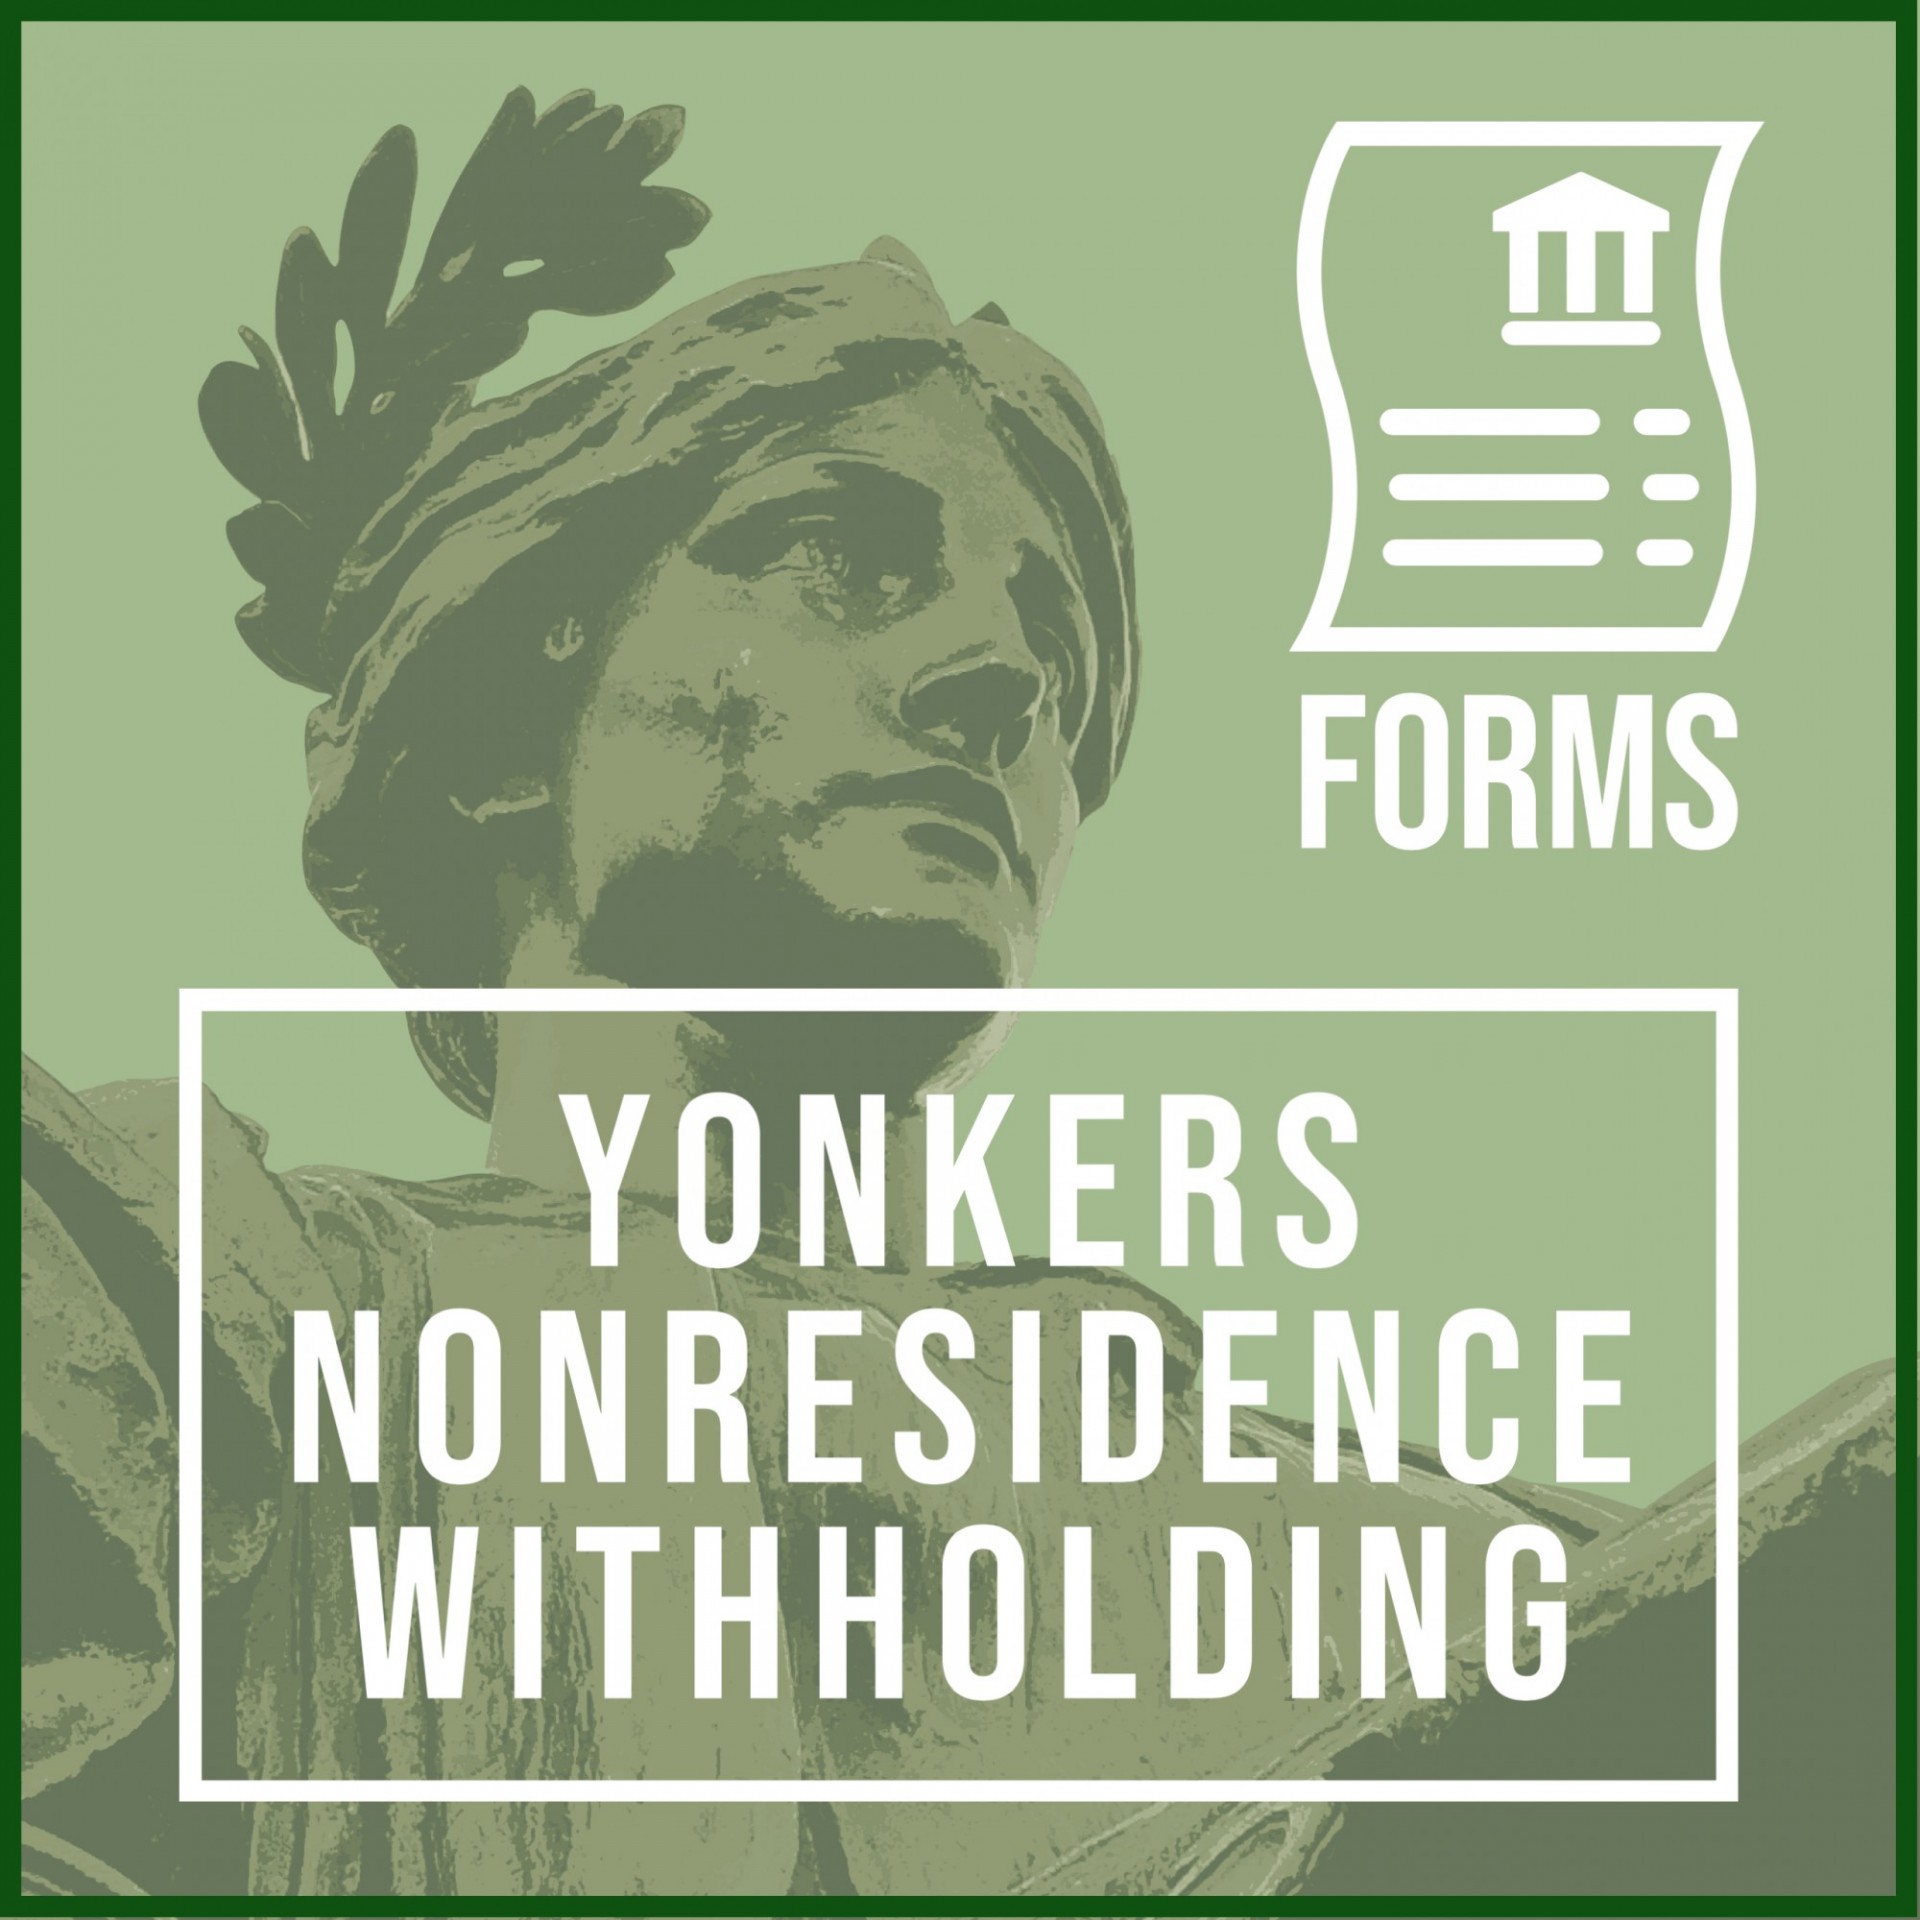 Forms Icon: Yonkers Nonresidence Withholding